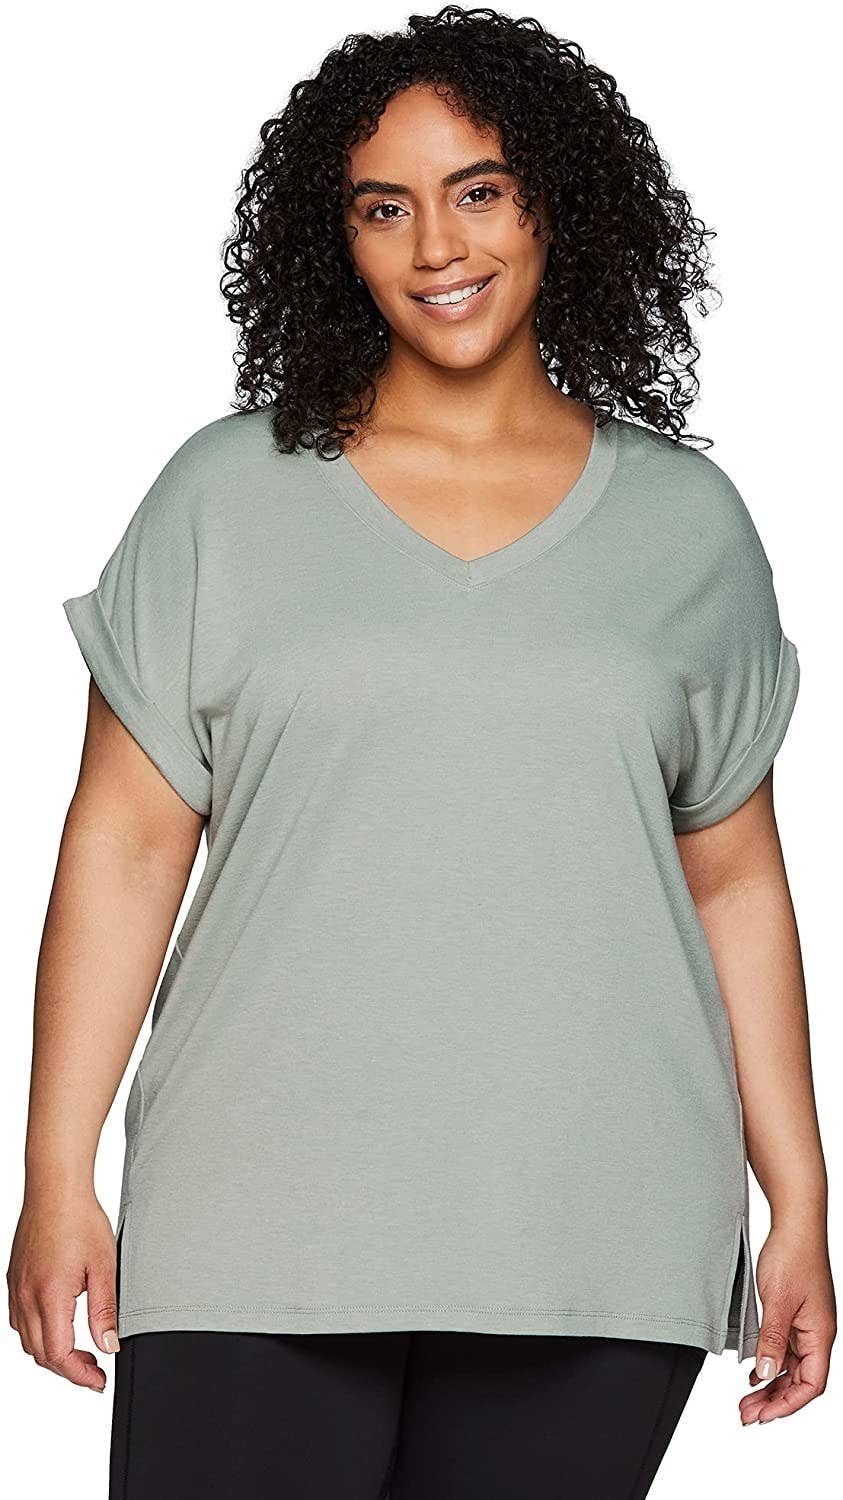 The Best Plus-Size Tees for Work 